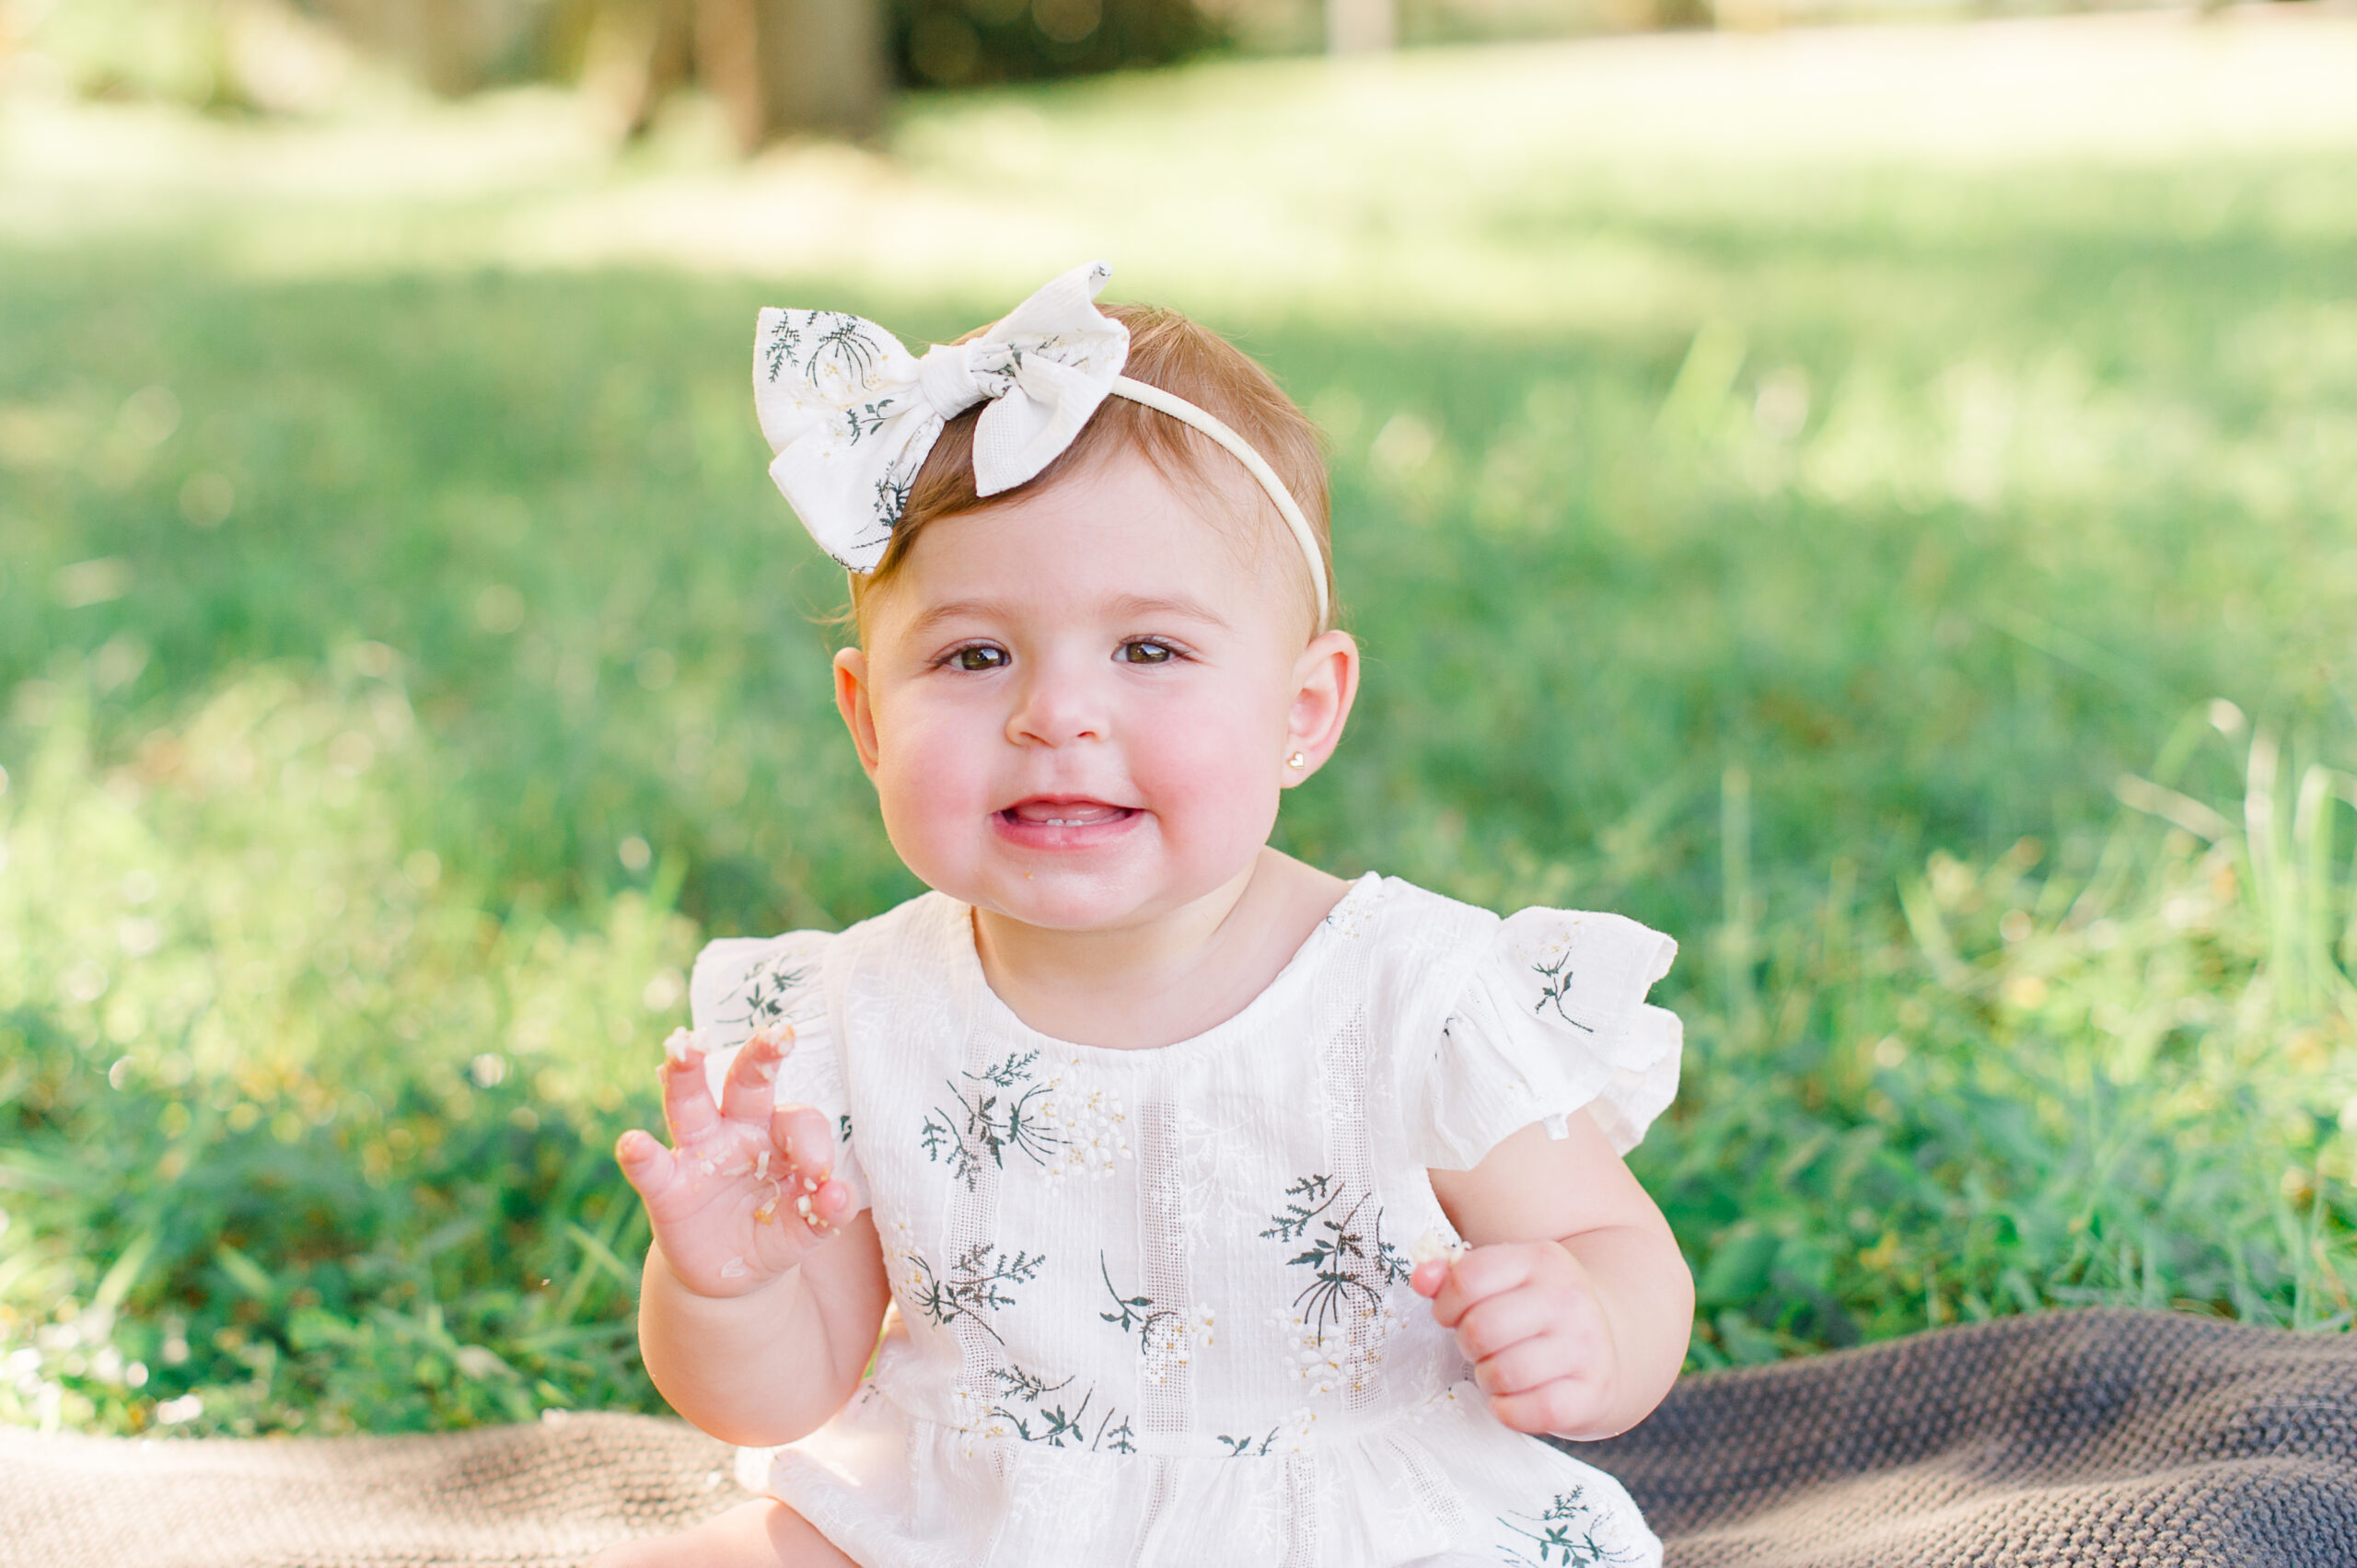 Adorable milestone session of a little girl sitting on a blanket in the grass clapping!